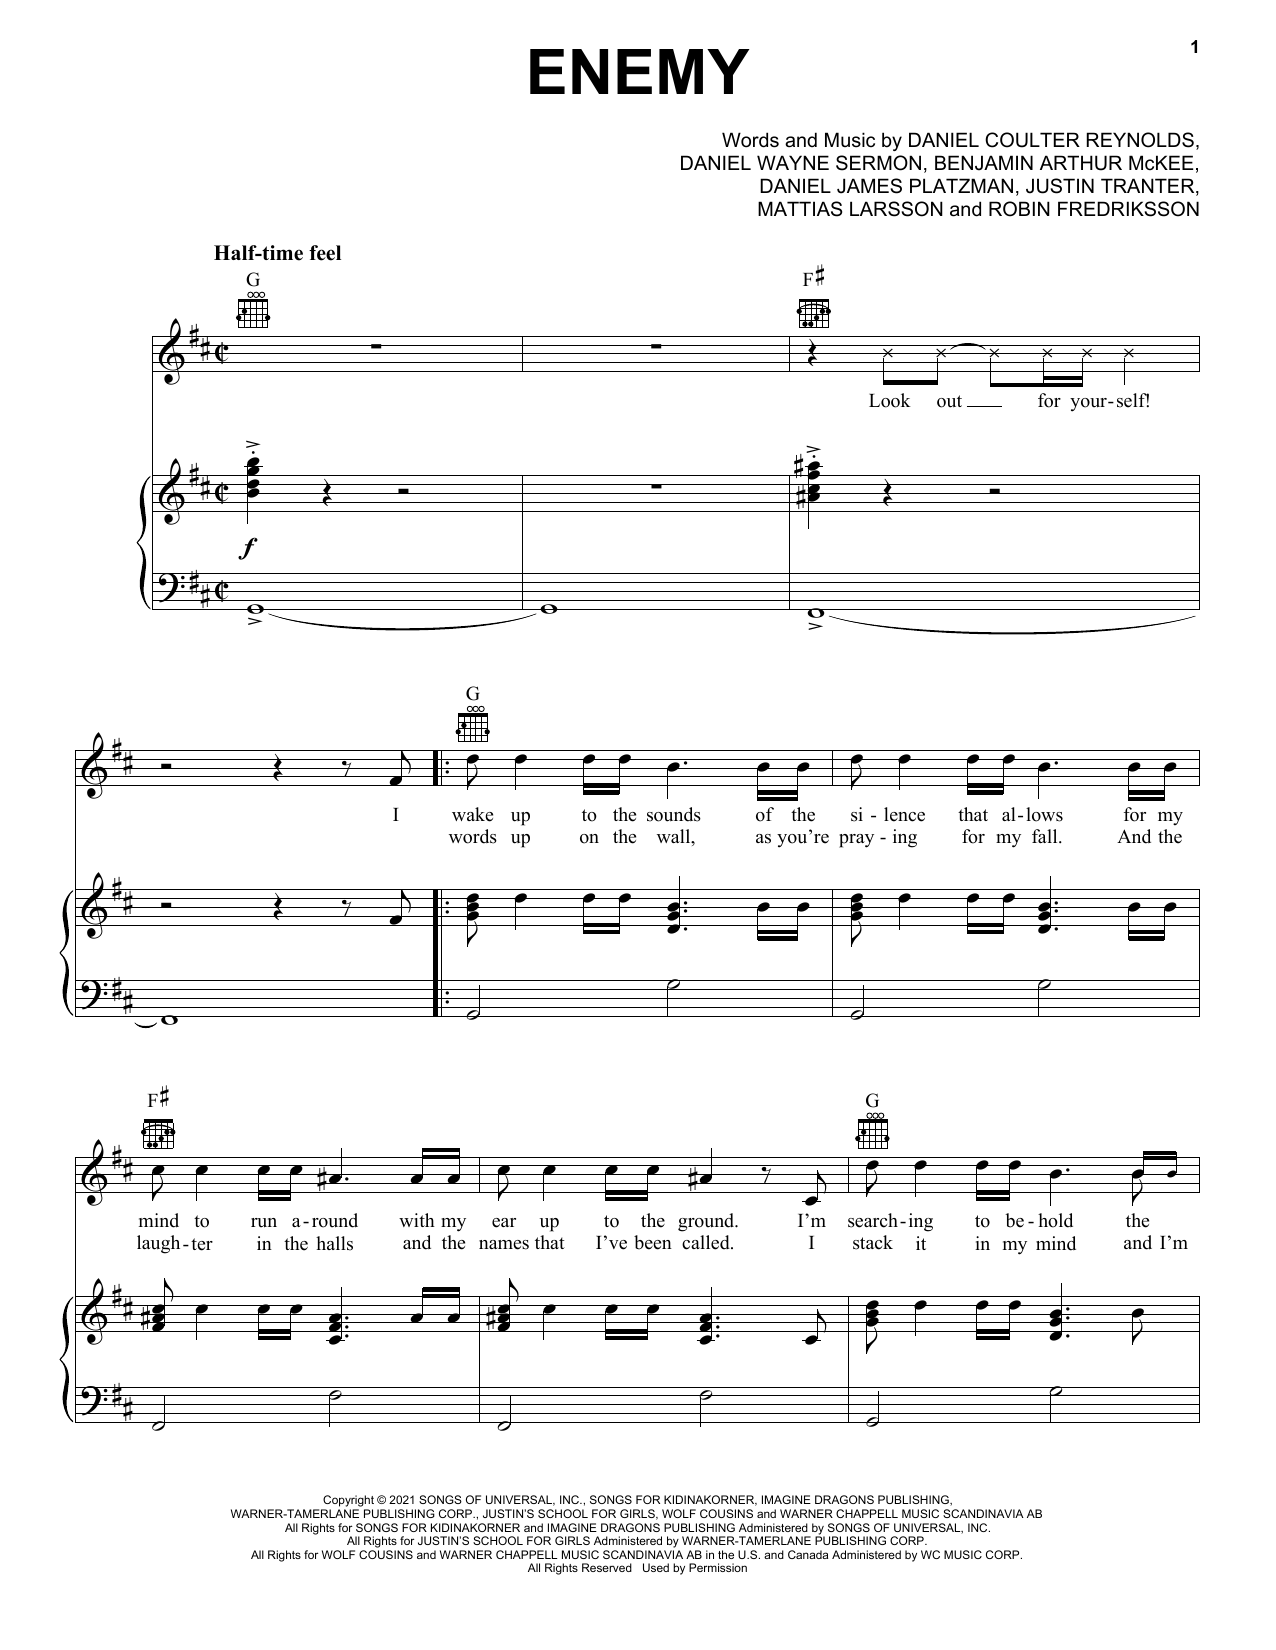 Download Imagine Dragons & JID Enemy (from the series Arcane League of Sheet Music